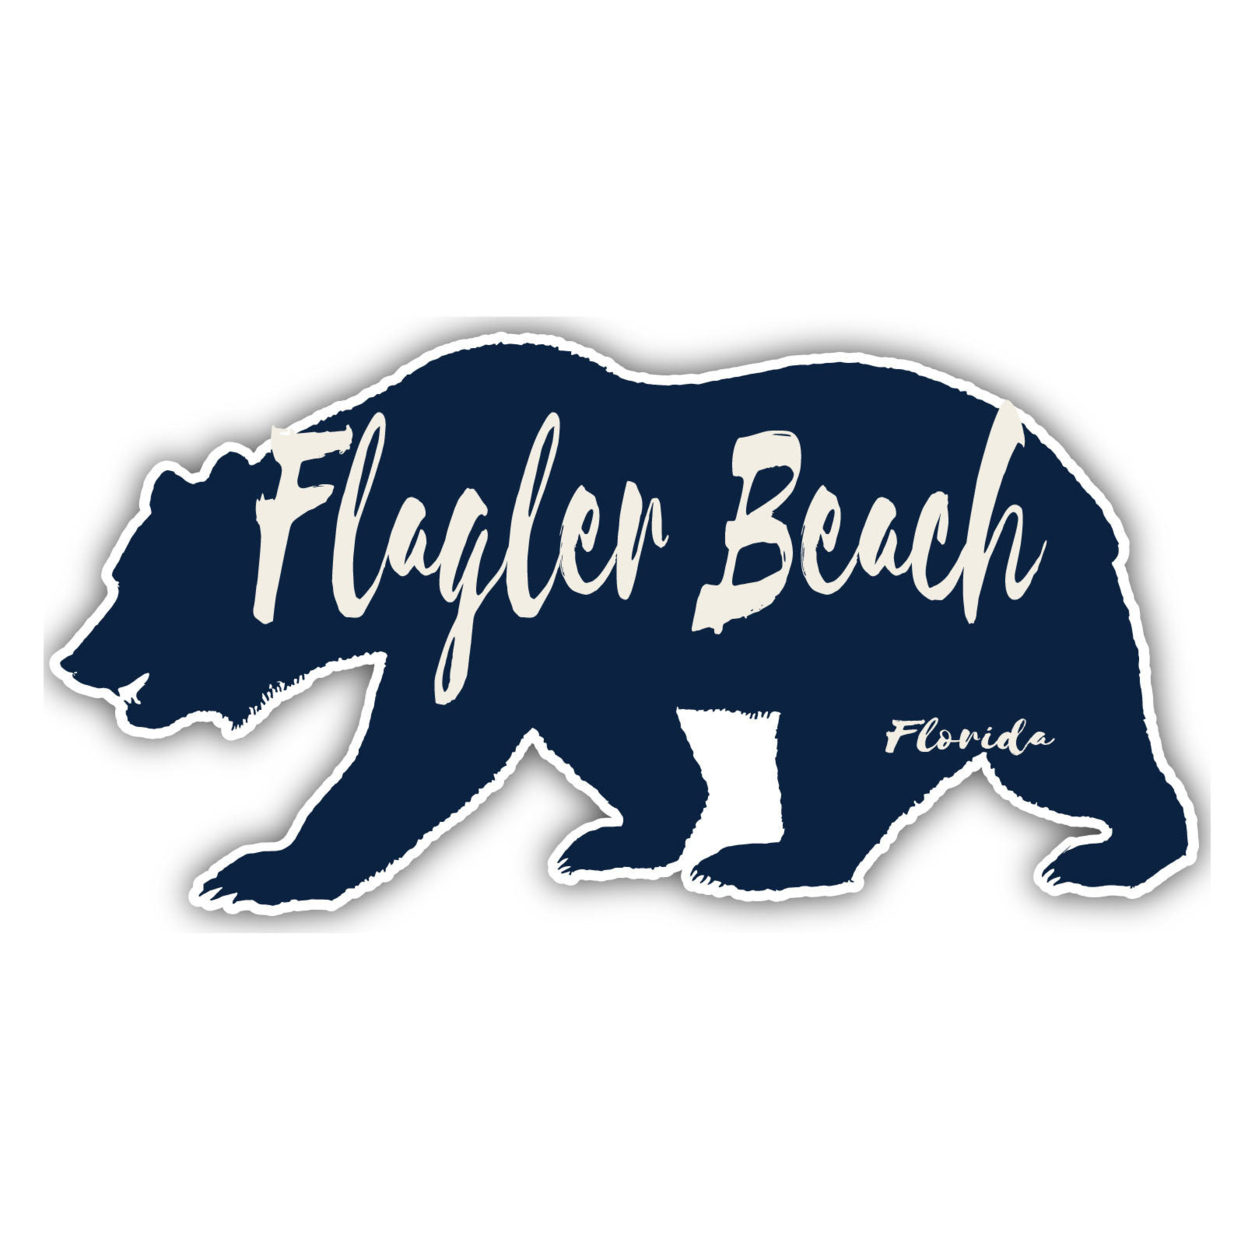 Flagler Beach Florida Souvenir Decorative Stickers (Choose Theme And Size) - 4-Pack, 8-Inch, Camp Life